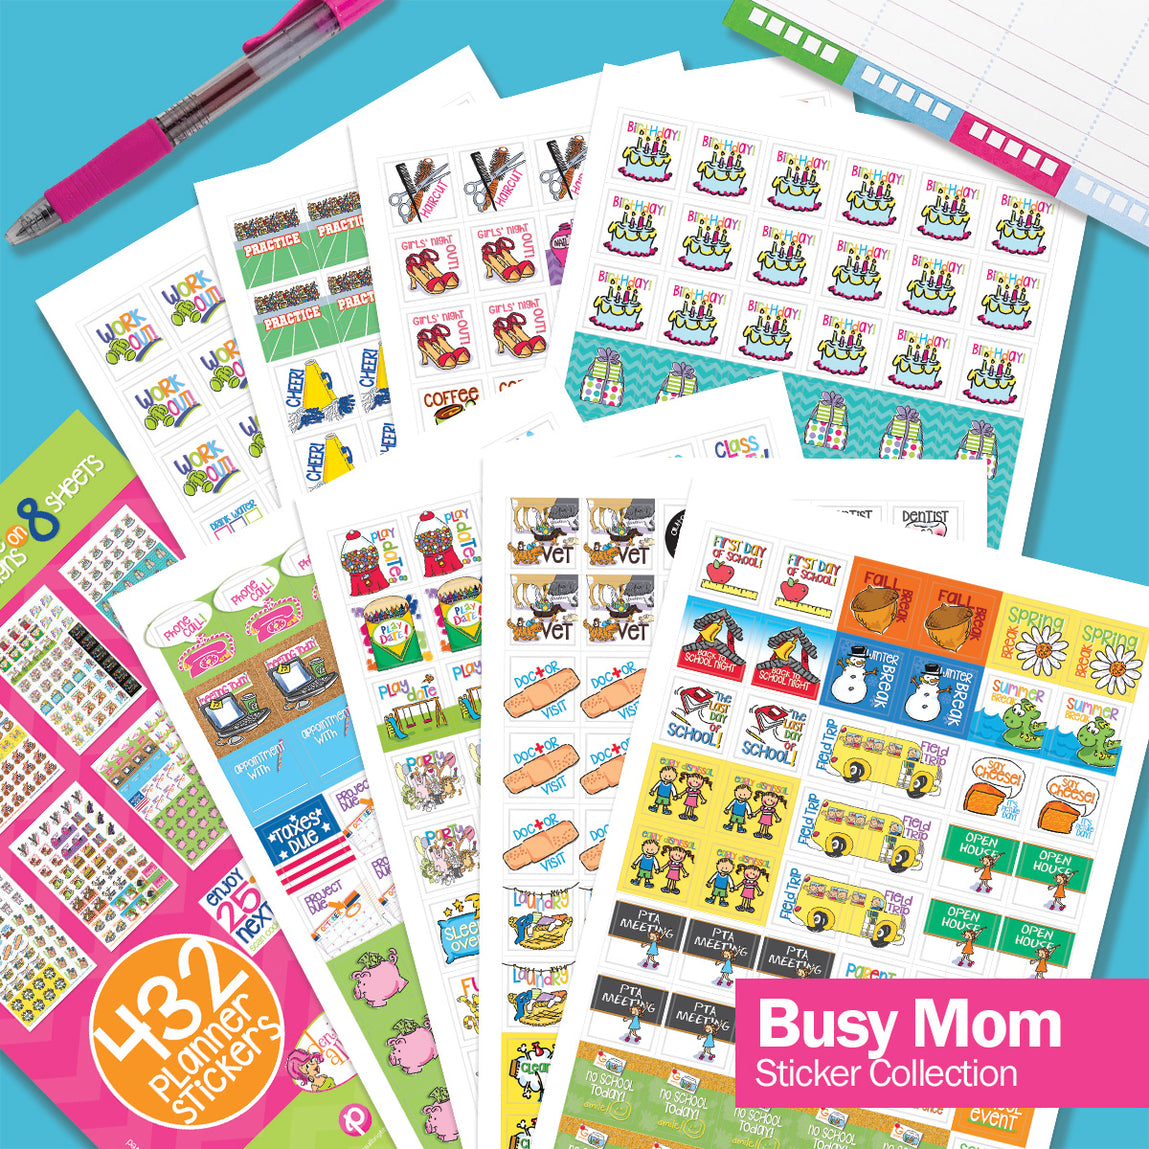 Mobile & Diary Stickers/Decals